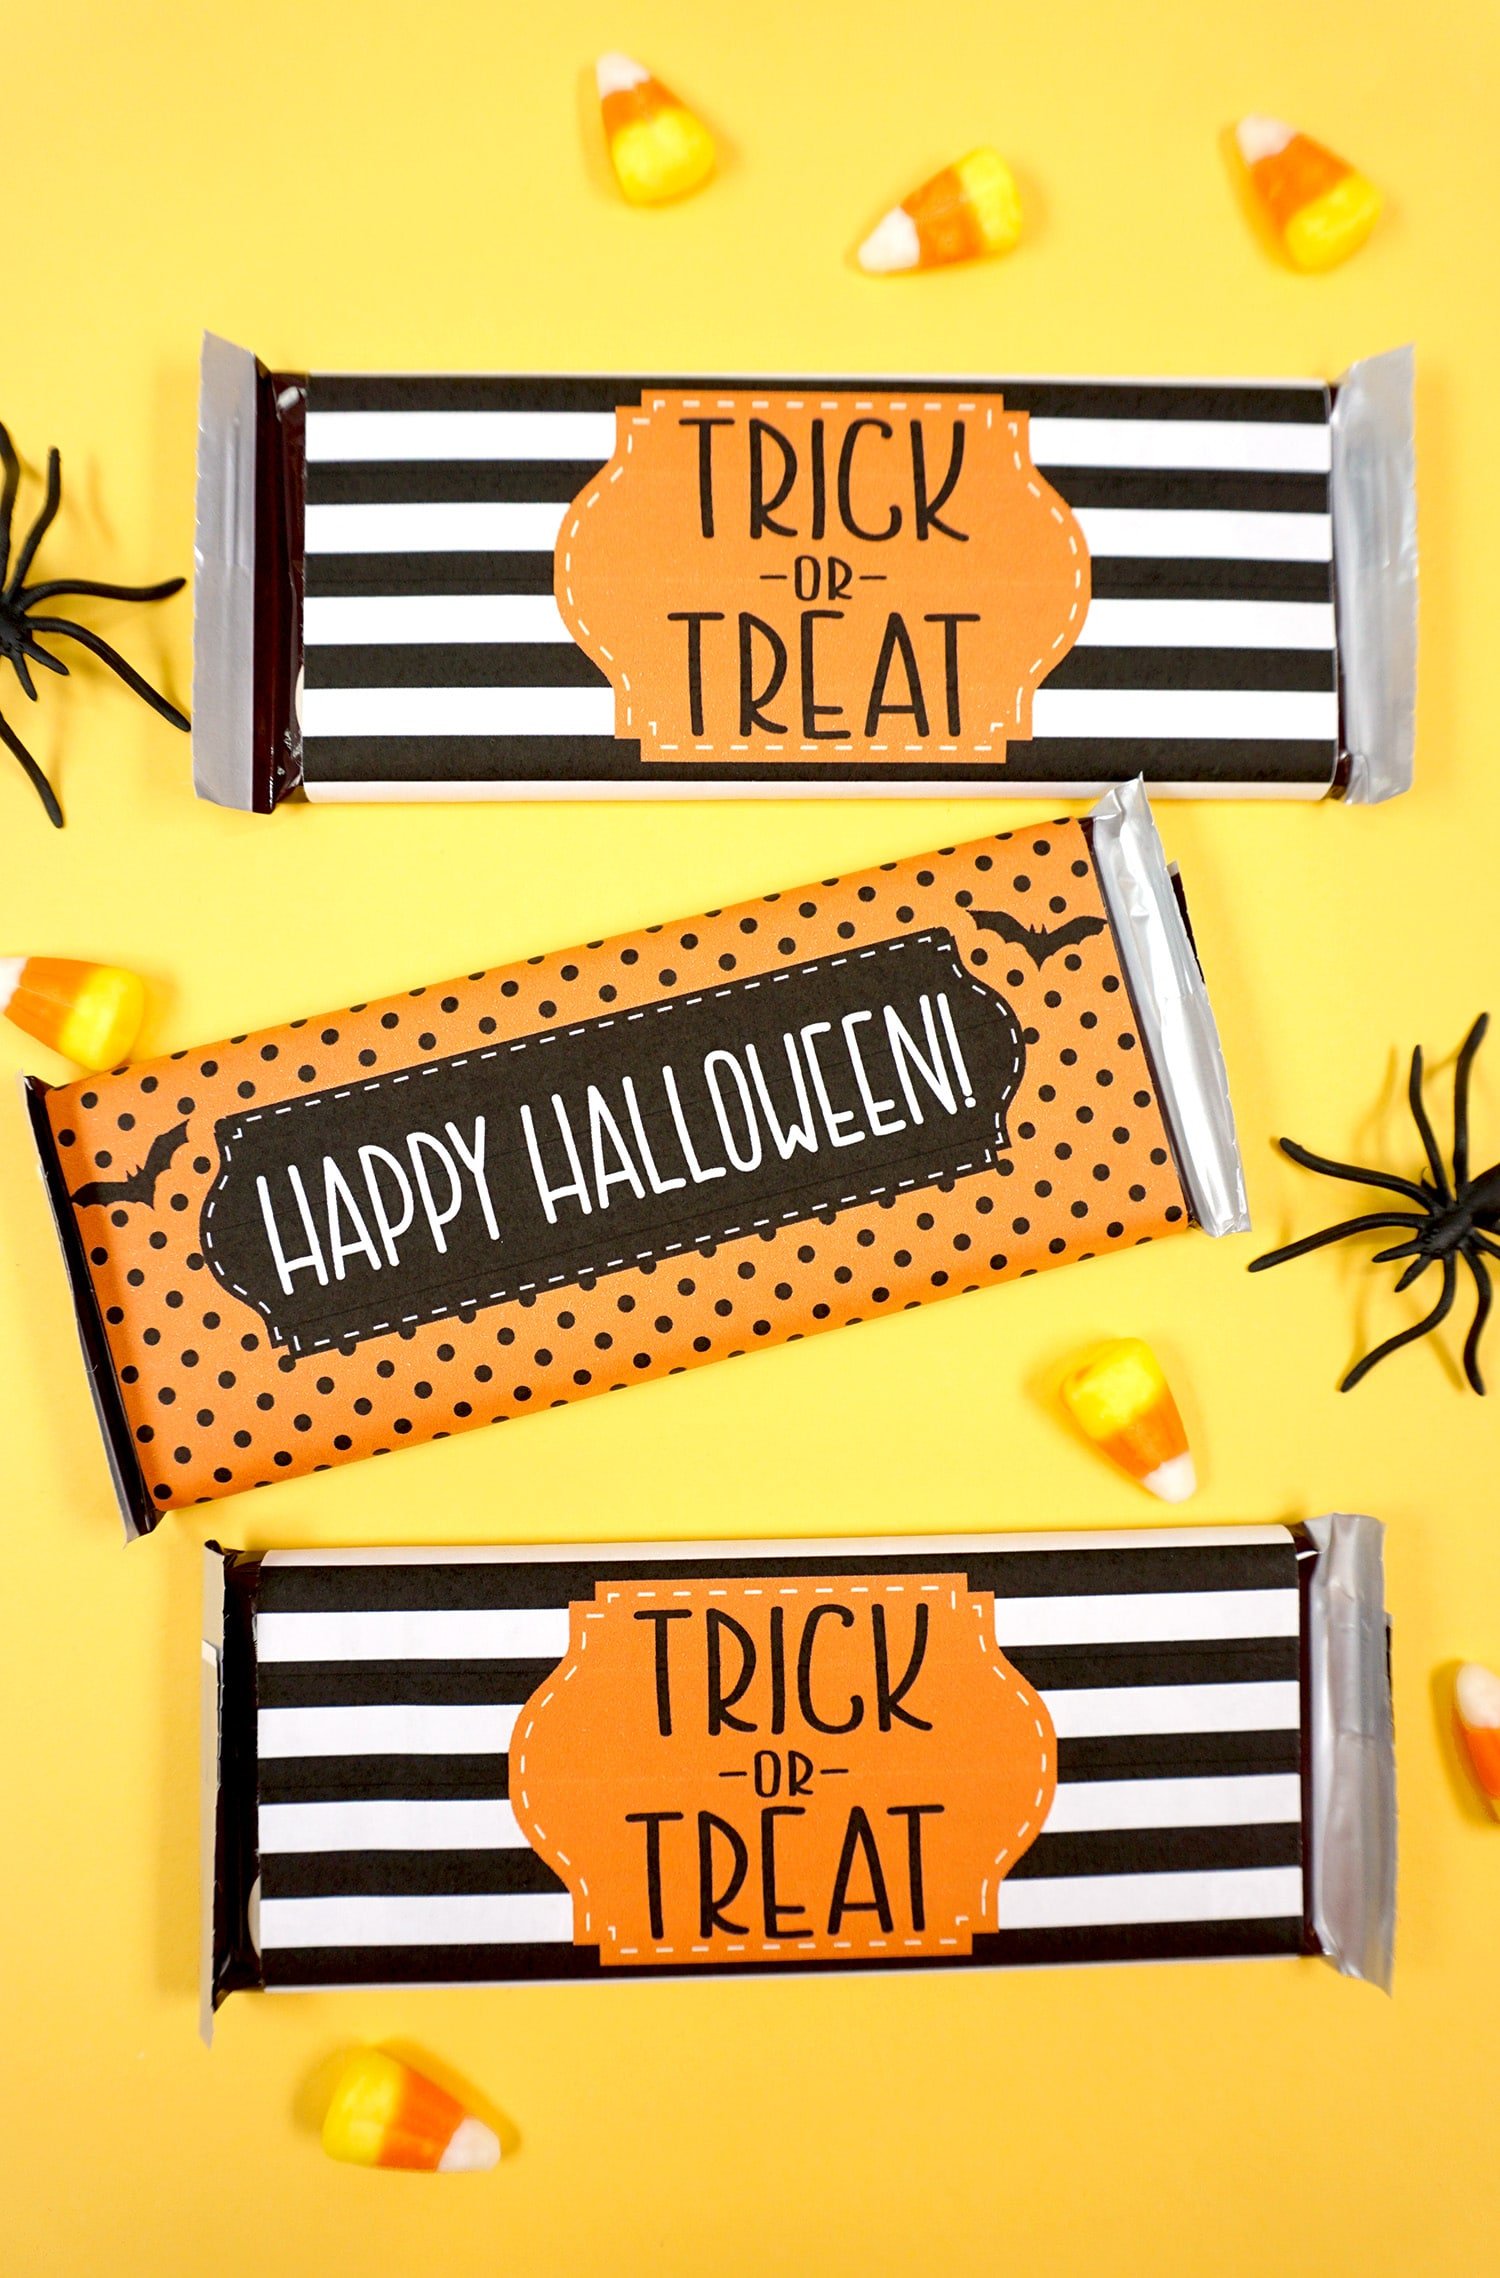 completed wrapped candy bars for halloween